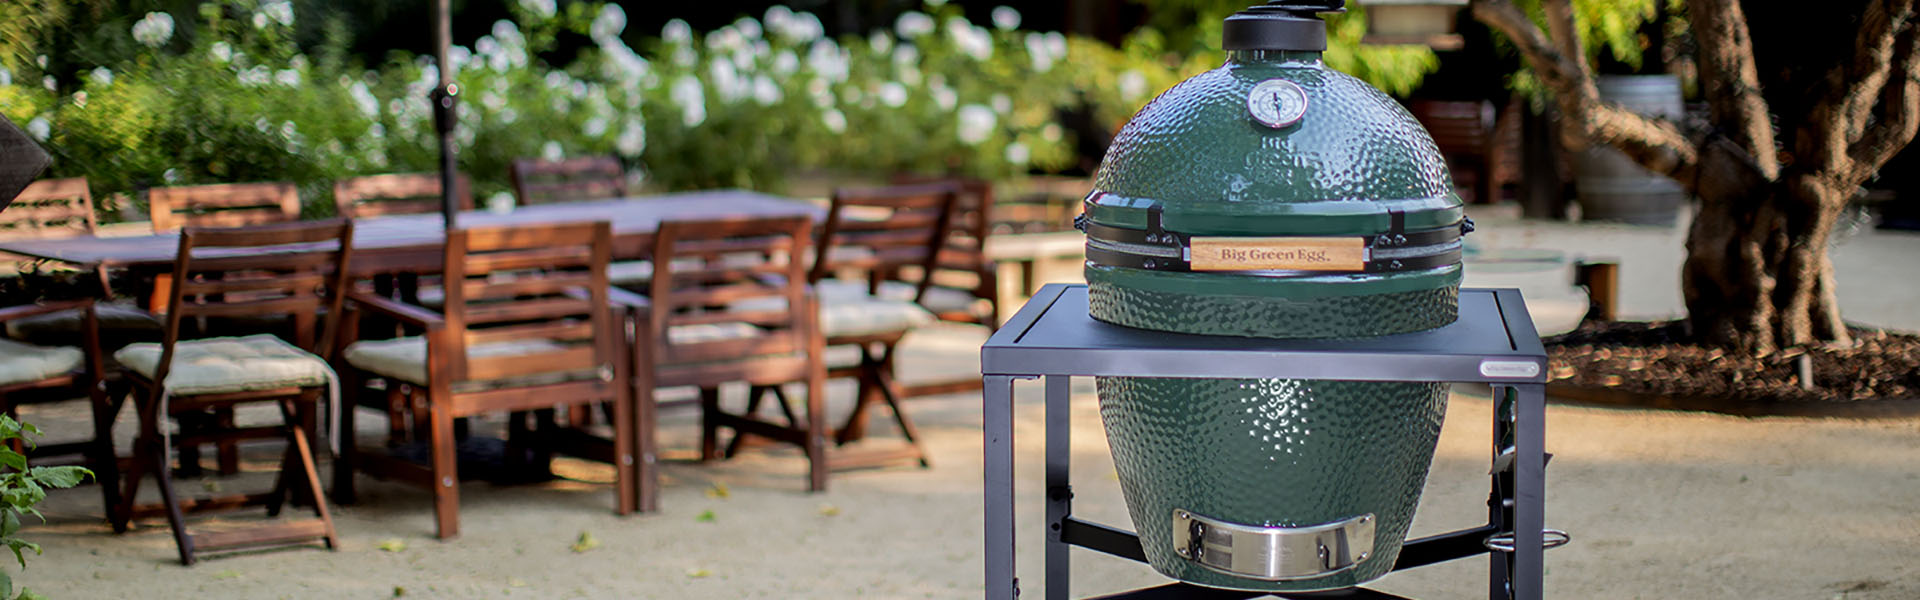 Going Green is Natural for the Big Green Egg